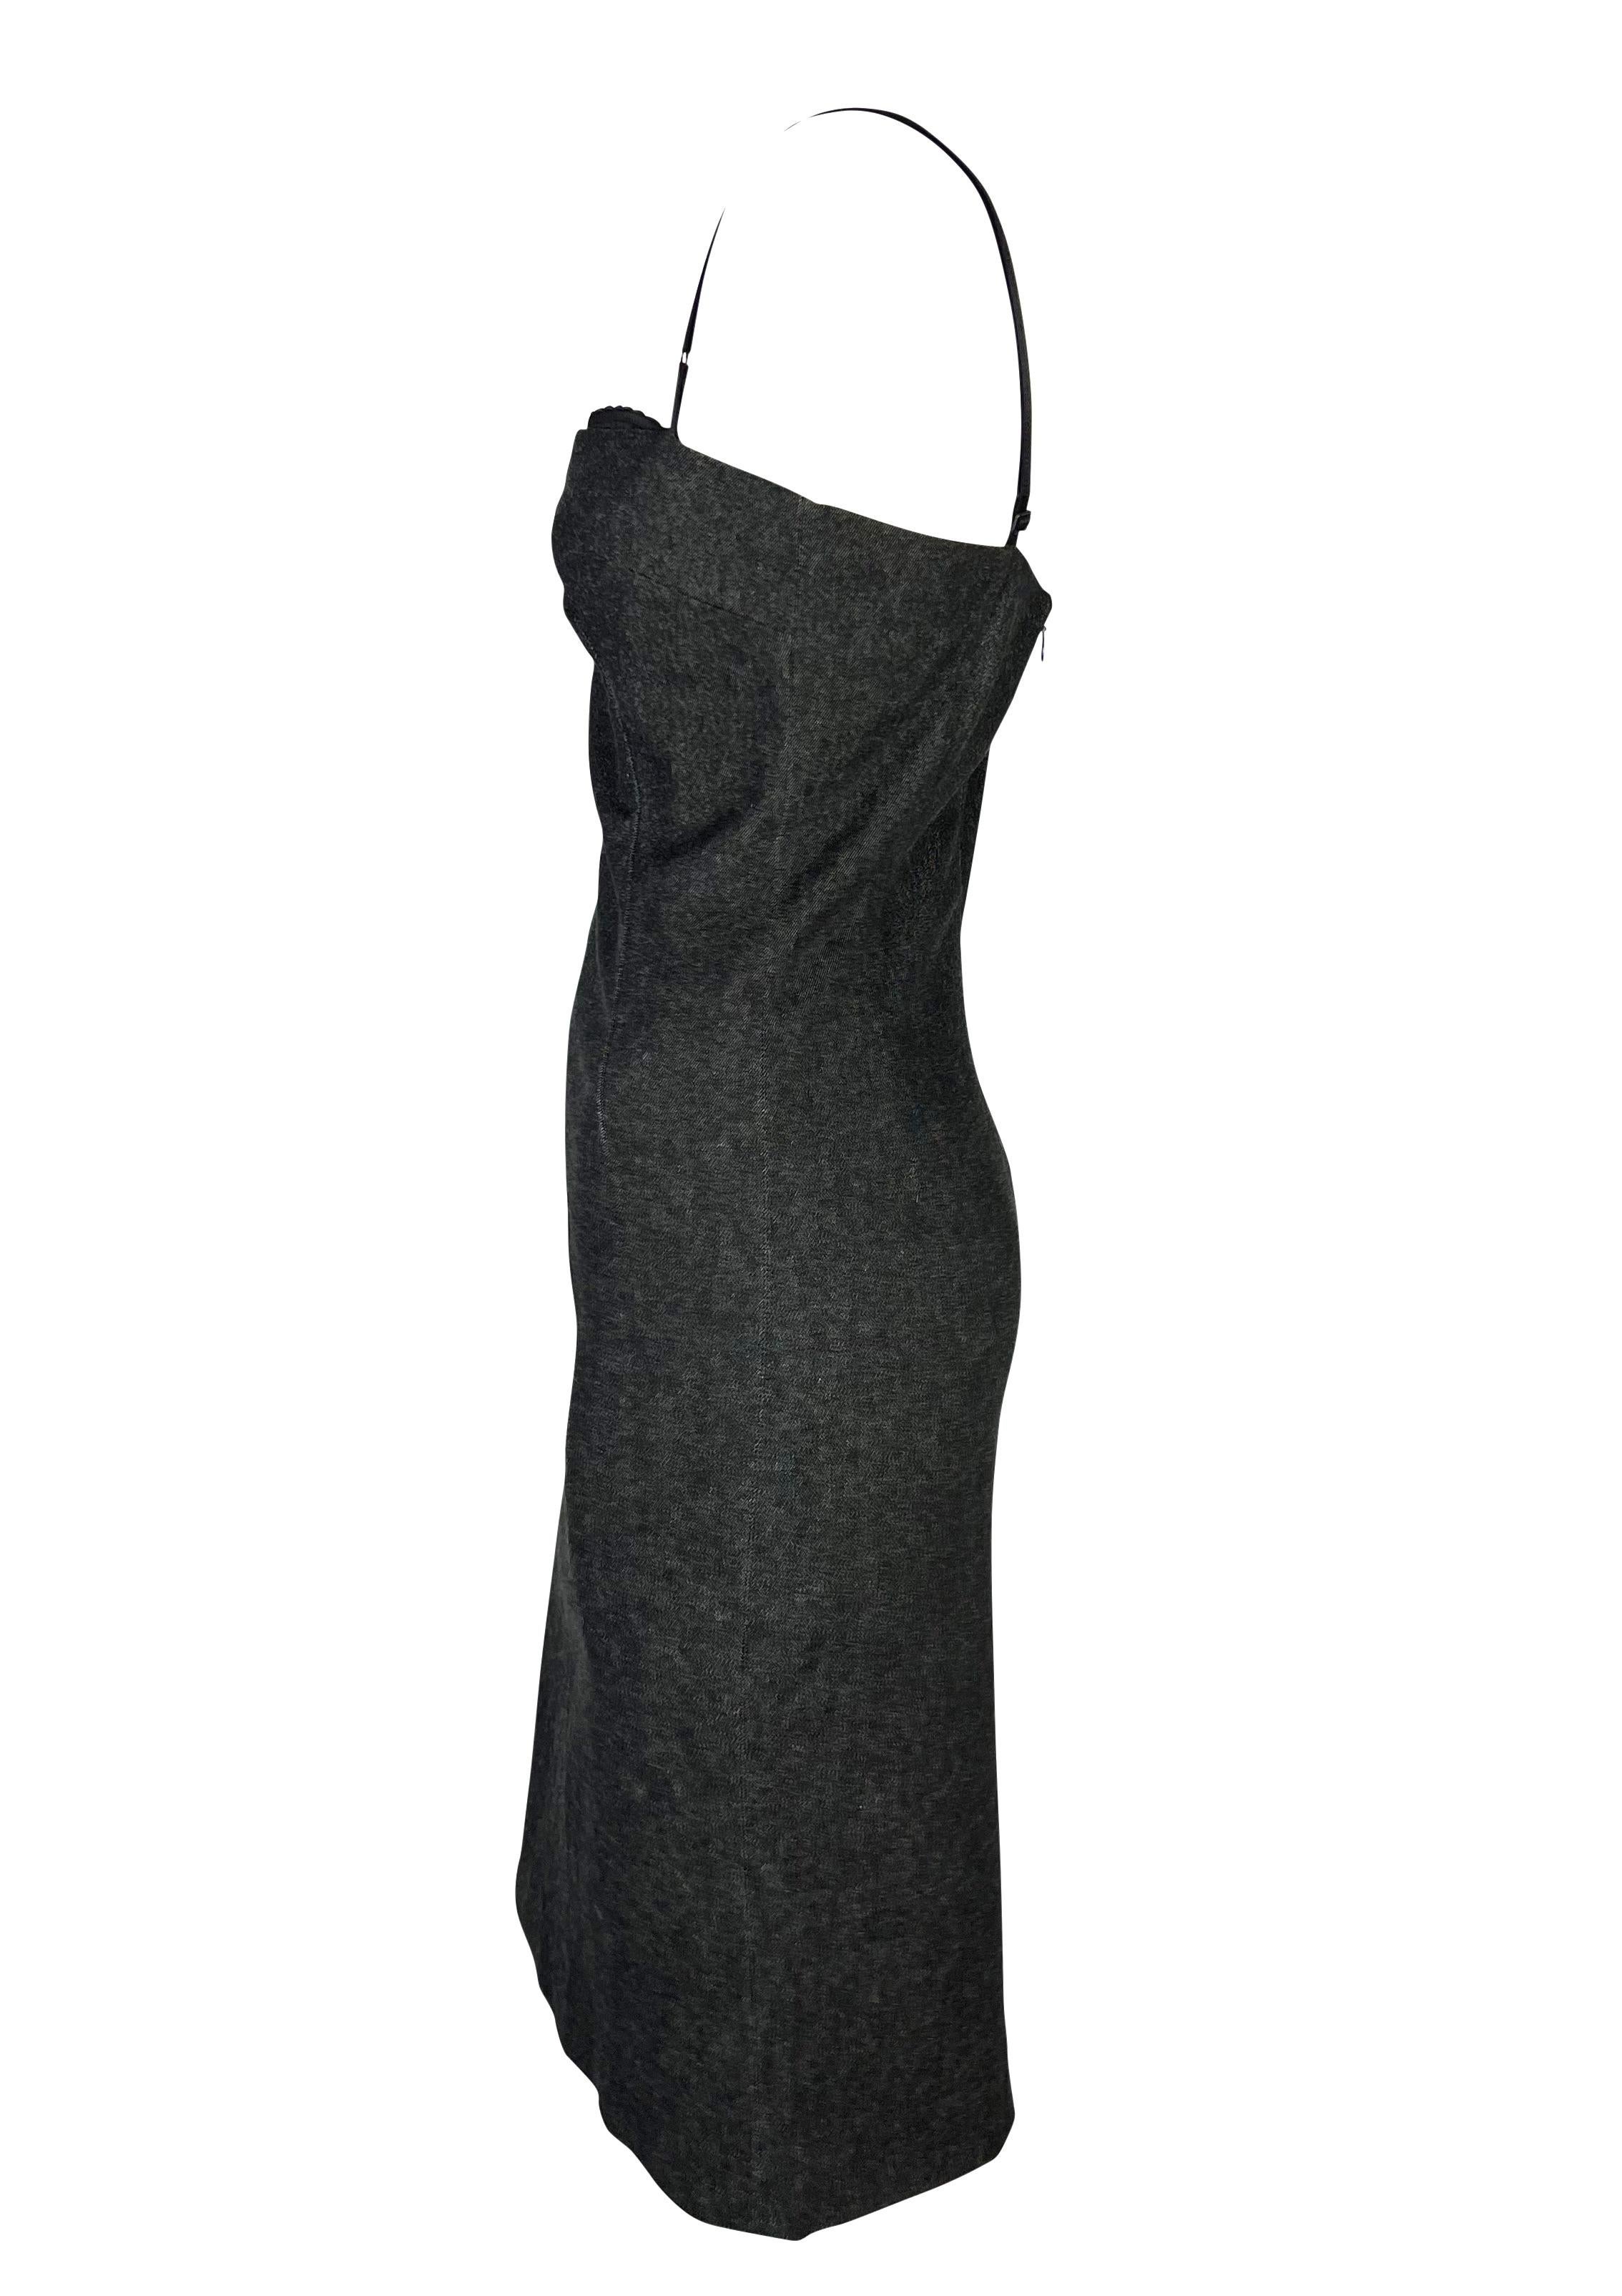 2000s Dolce & Gabbana Black Stretch Denim Bodycon Pin-Up Dress In Good Condition For Sale In West Hollywood, CA